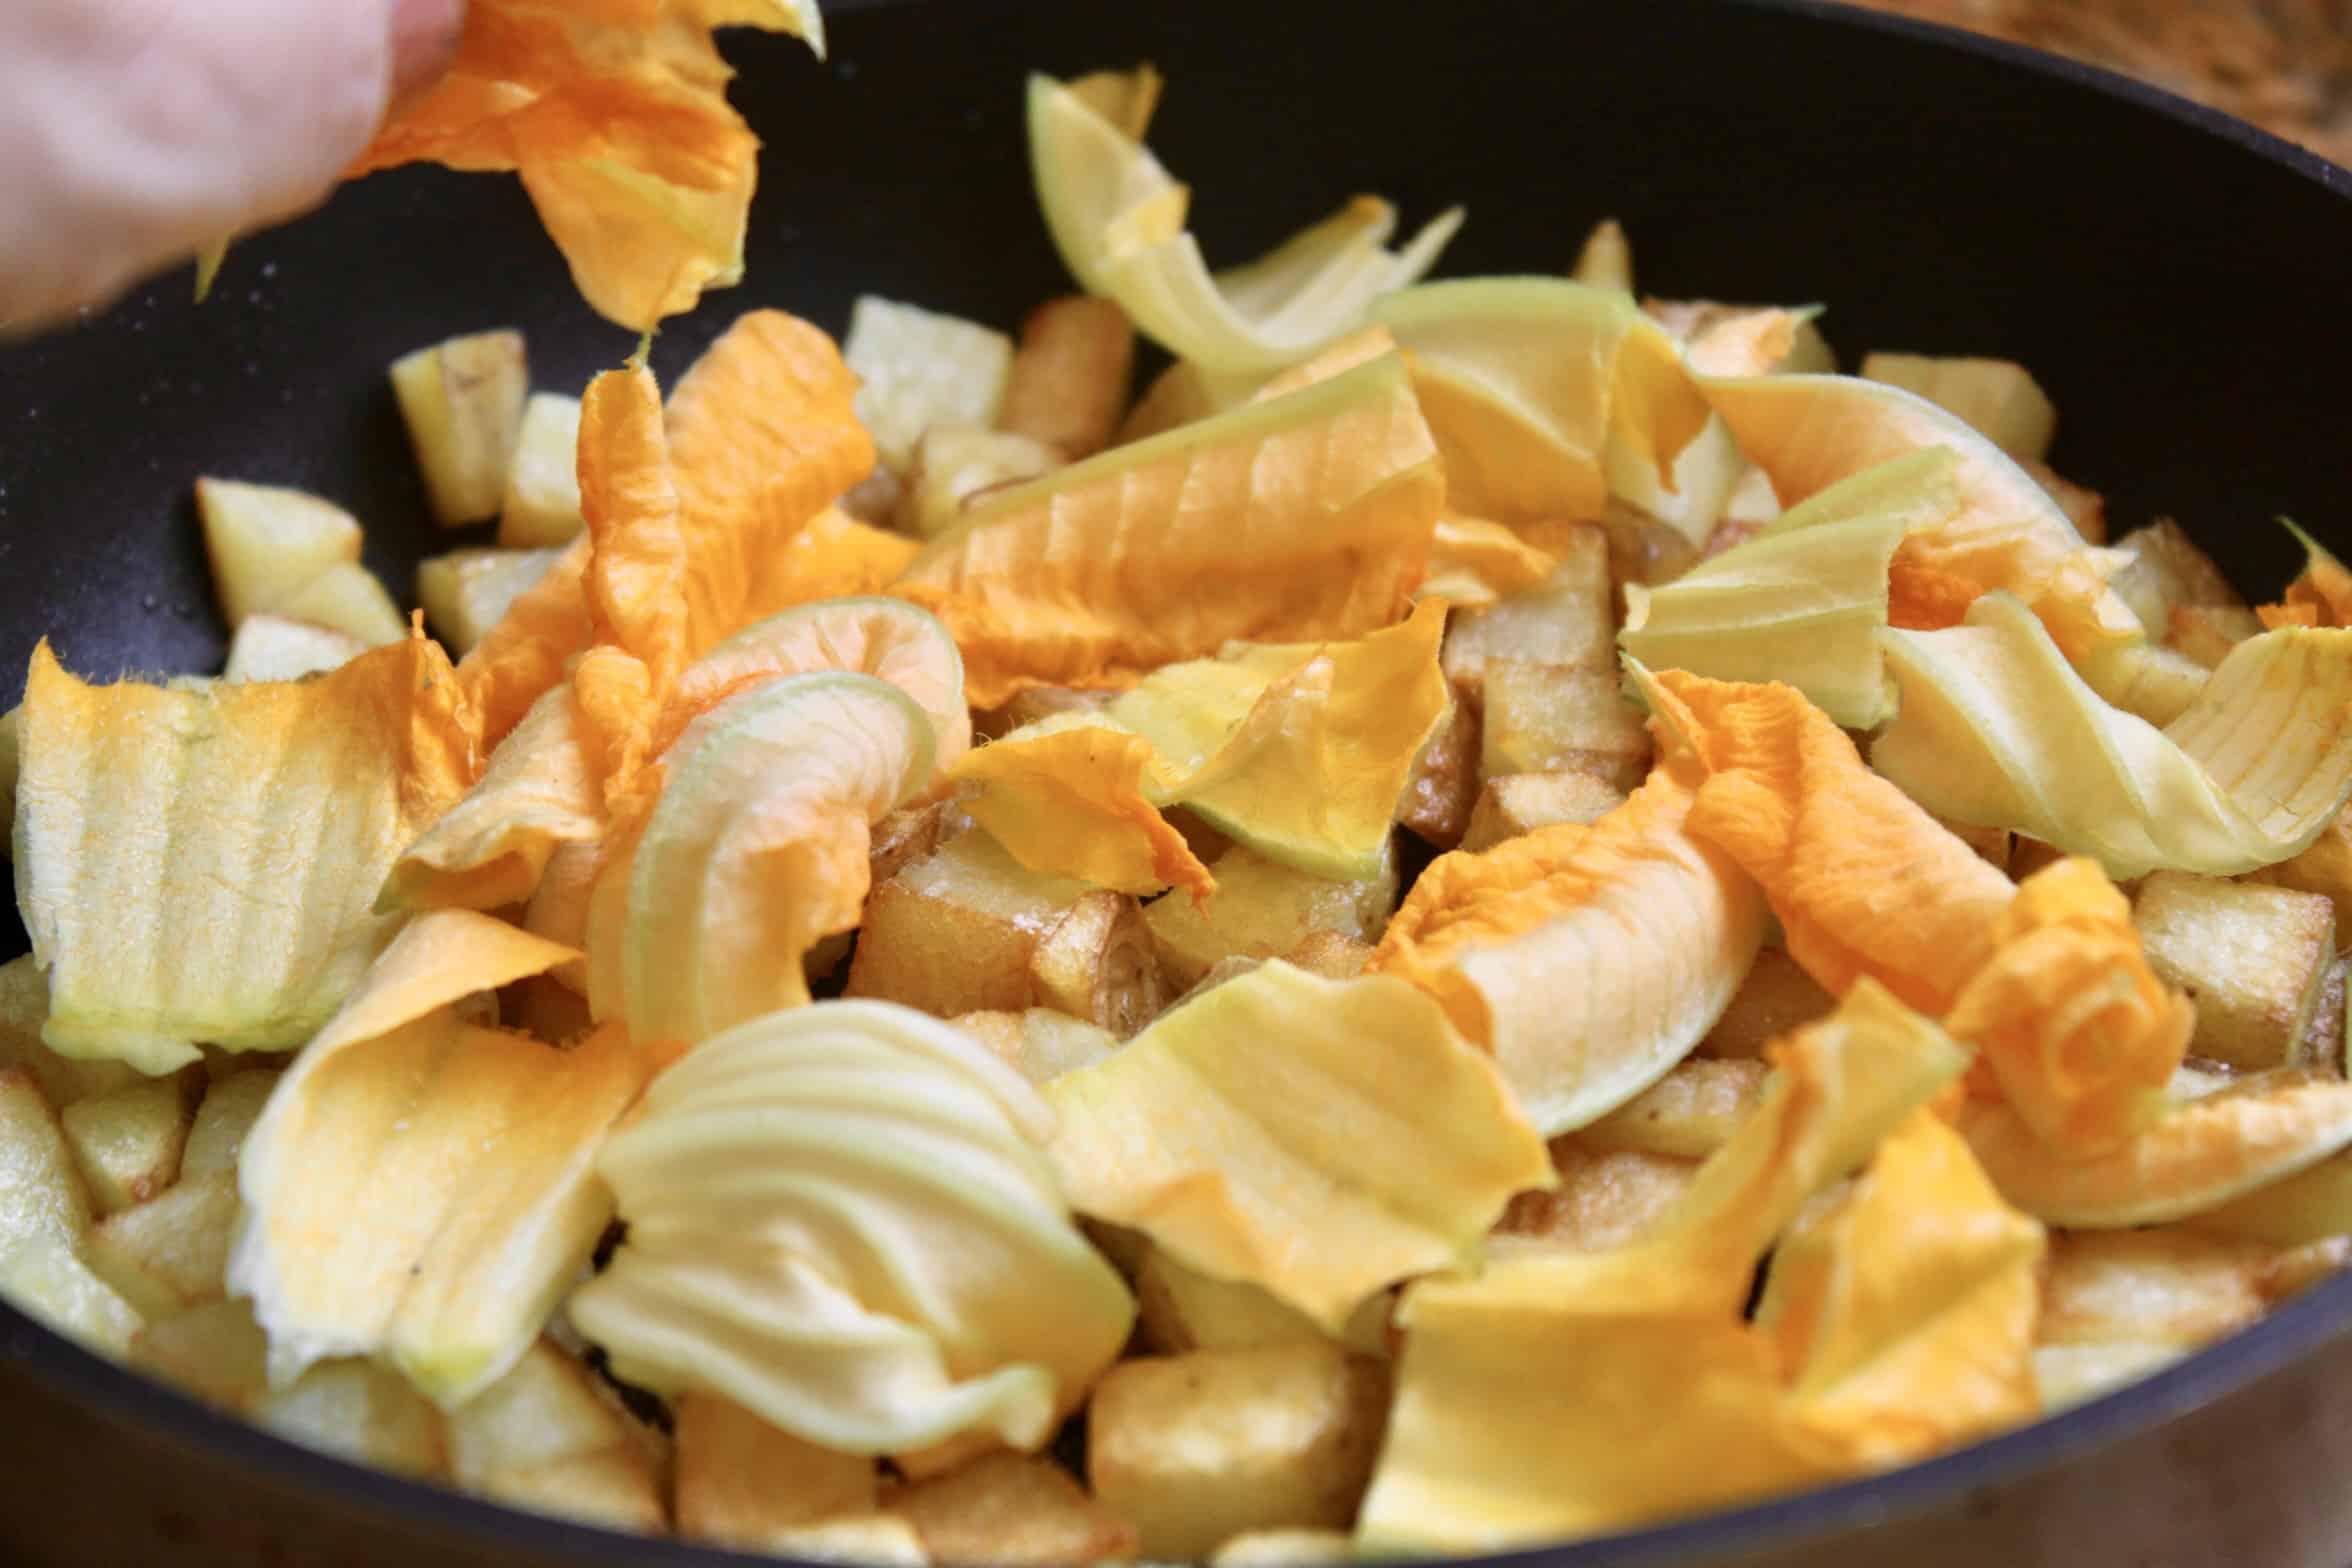 adding zucchini blossoms to potatoes in pan